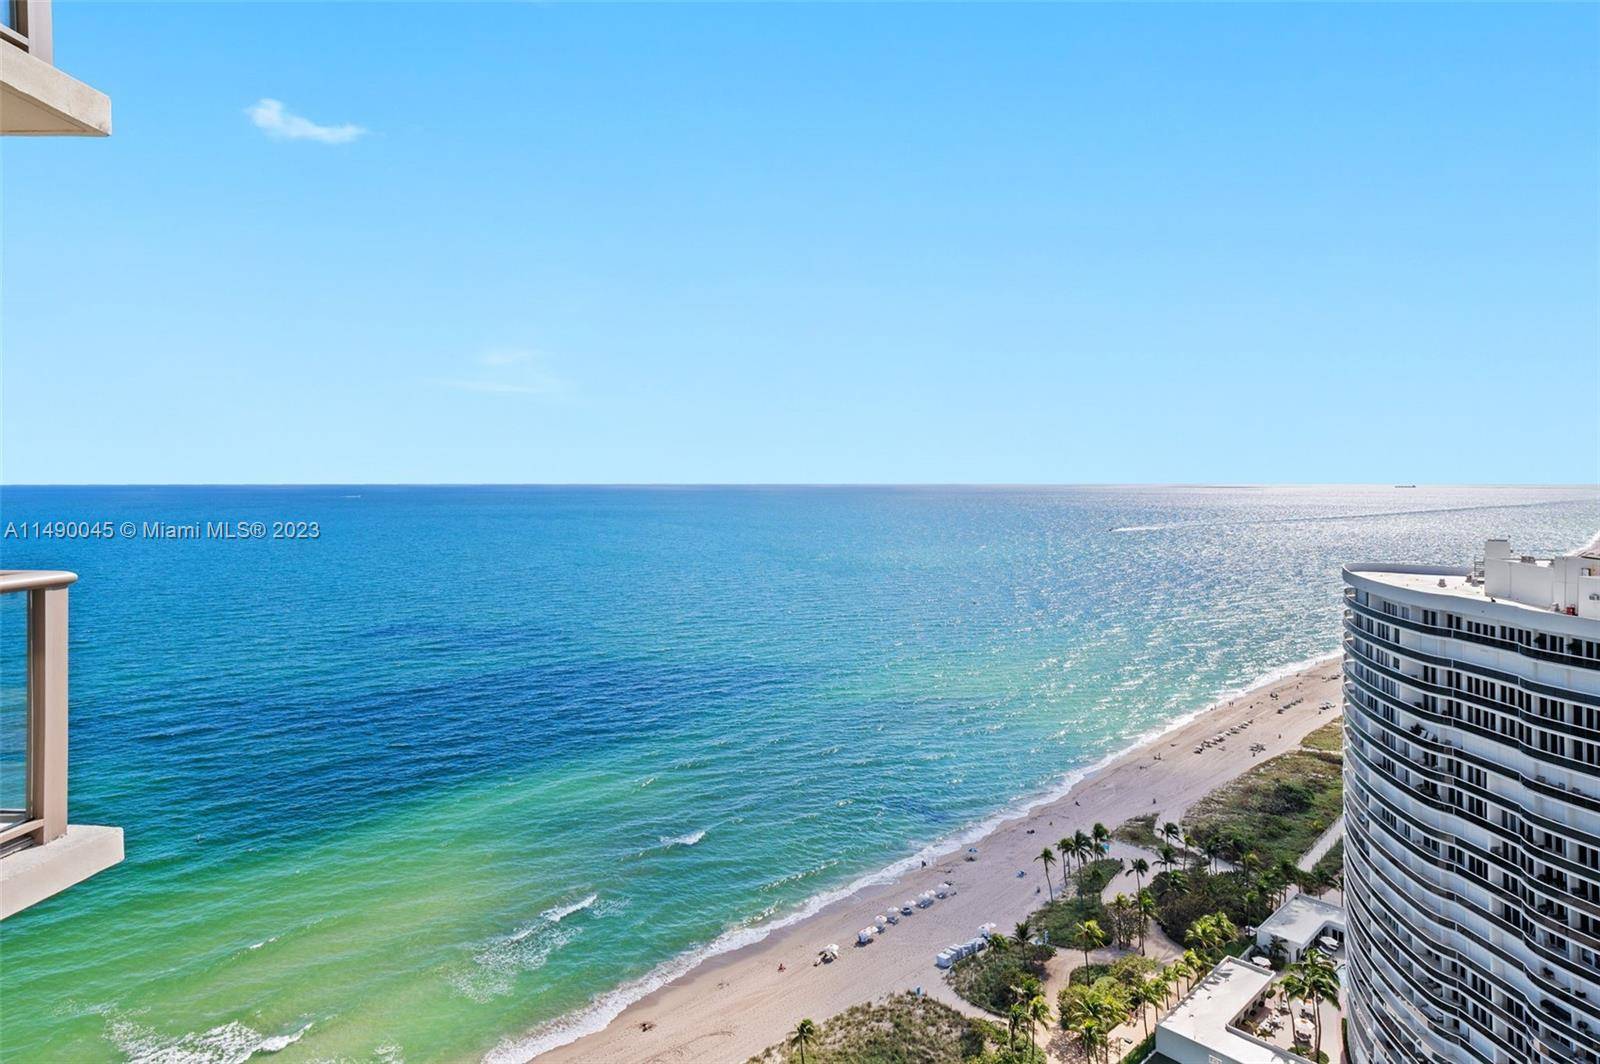 Direct ocean views from every room in this meticulously remodeled condo featuring 3 expansive oceanfront balconies and SE views spanning the ocean, South Beach, and the city.